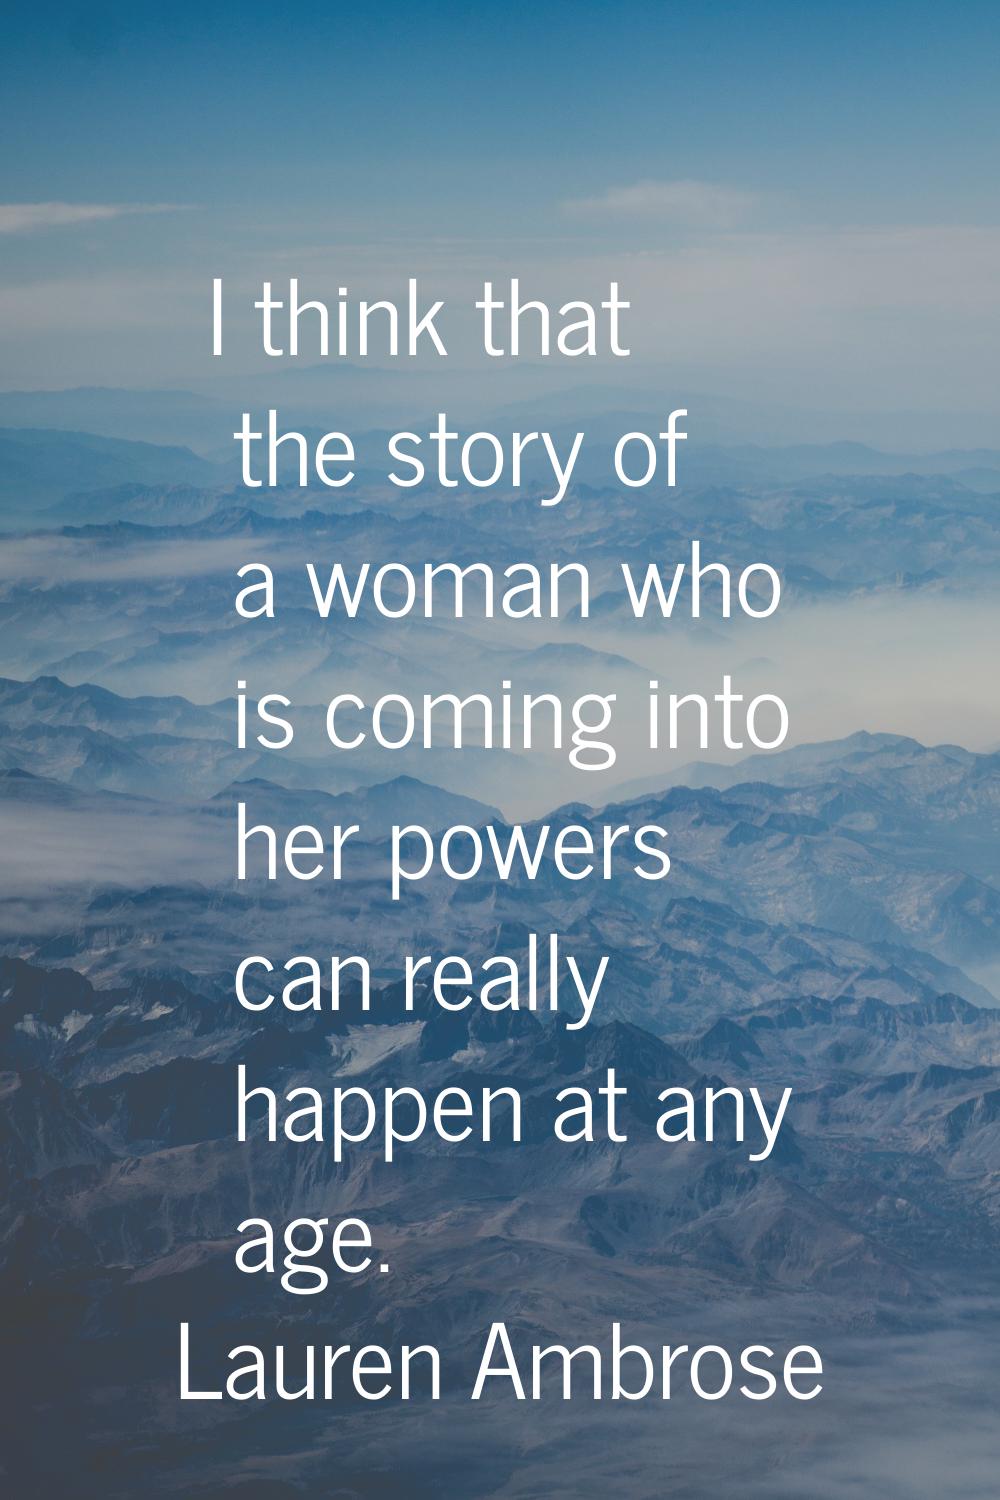 I think that the story of a woman who is coming into her powers can really happen at any age.